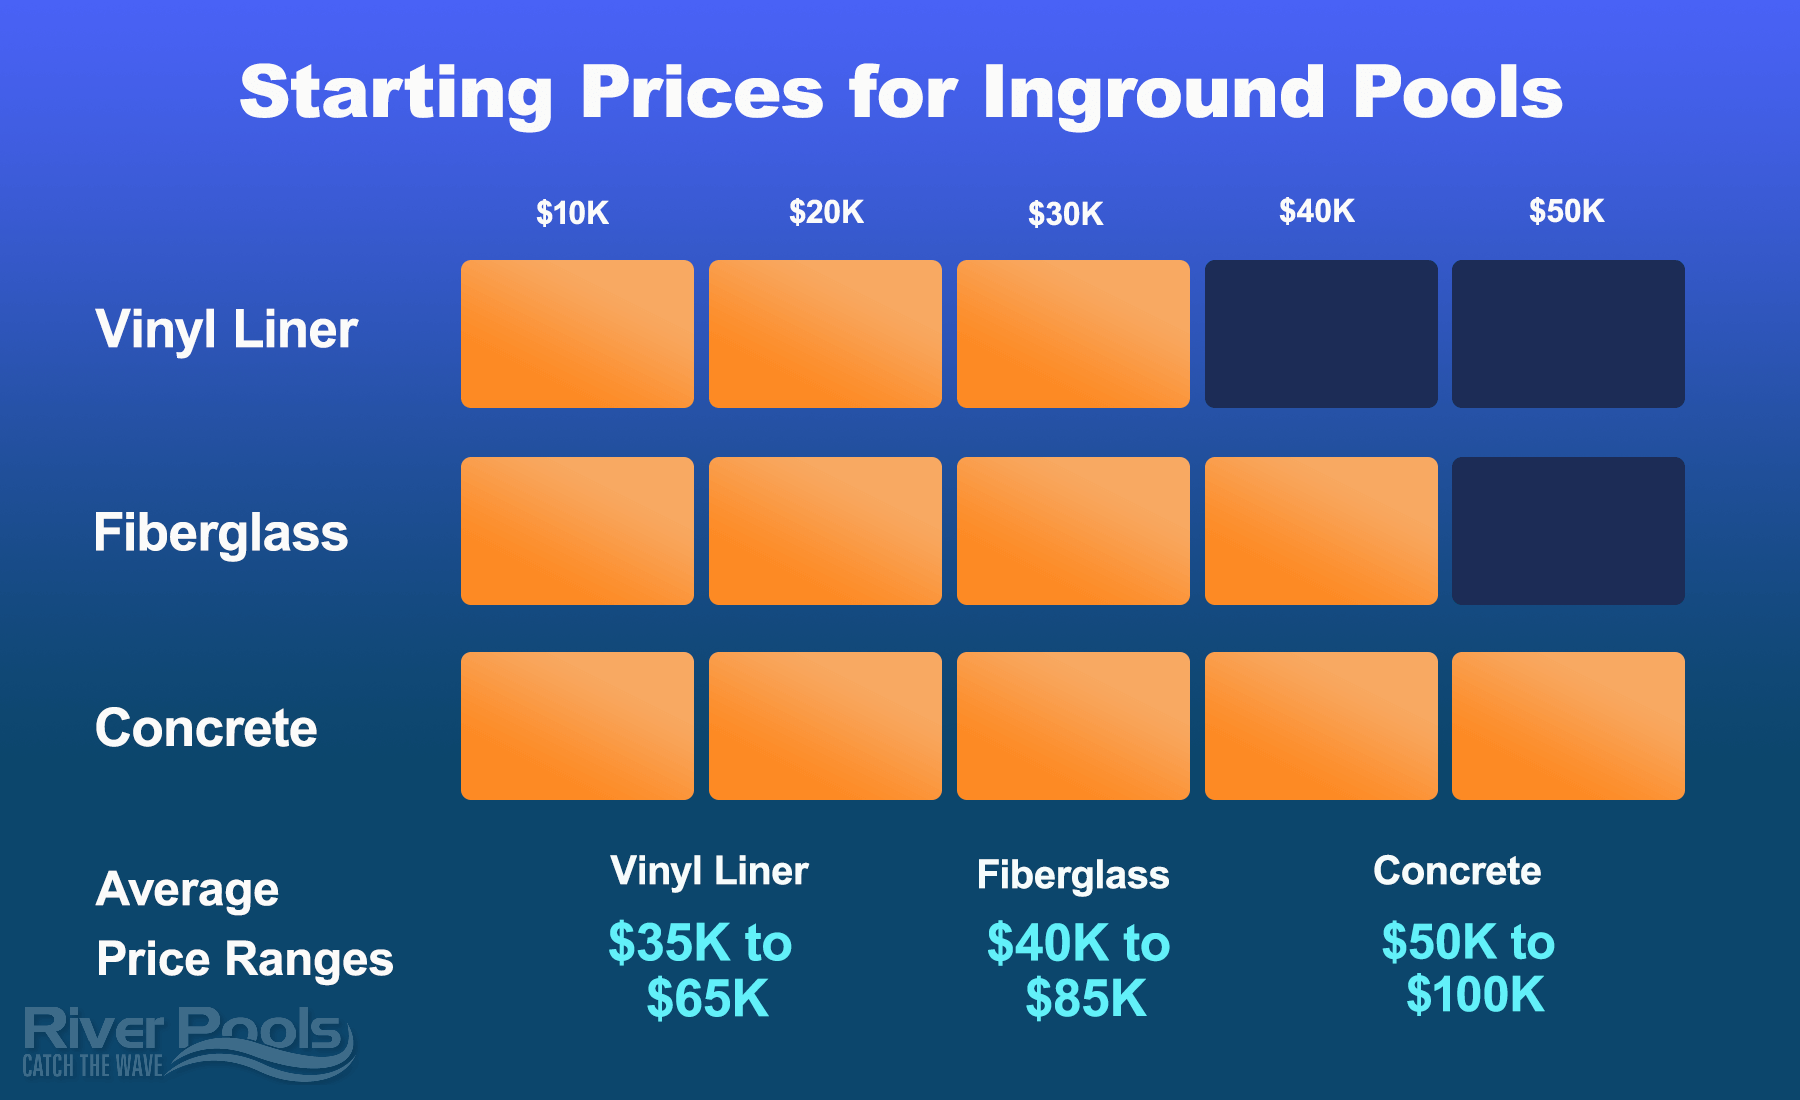 Inground Pool Prices in 2021 (Infographic)